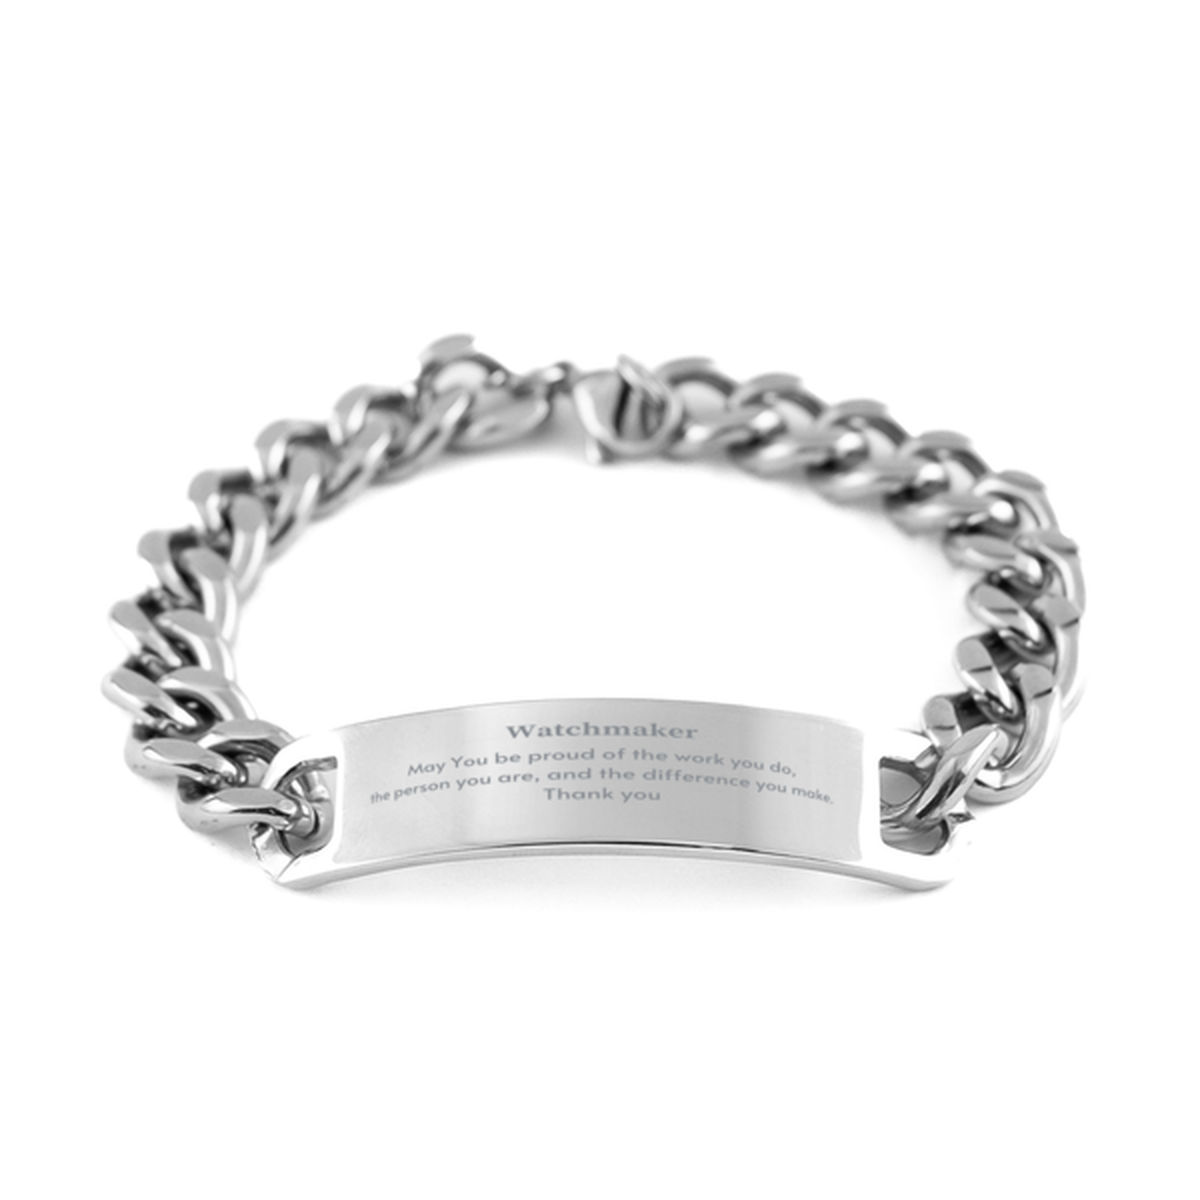 Heartwarming Cuban Chain Stainless Steel Bracelet Retirement Coworkers Gifts for Watchmaker, Watchmaker May You be proud of the work you do, the person you are Gifts for Boss Men Women Friends